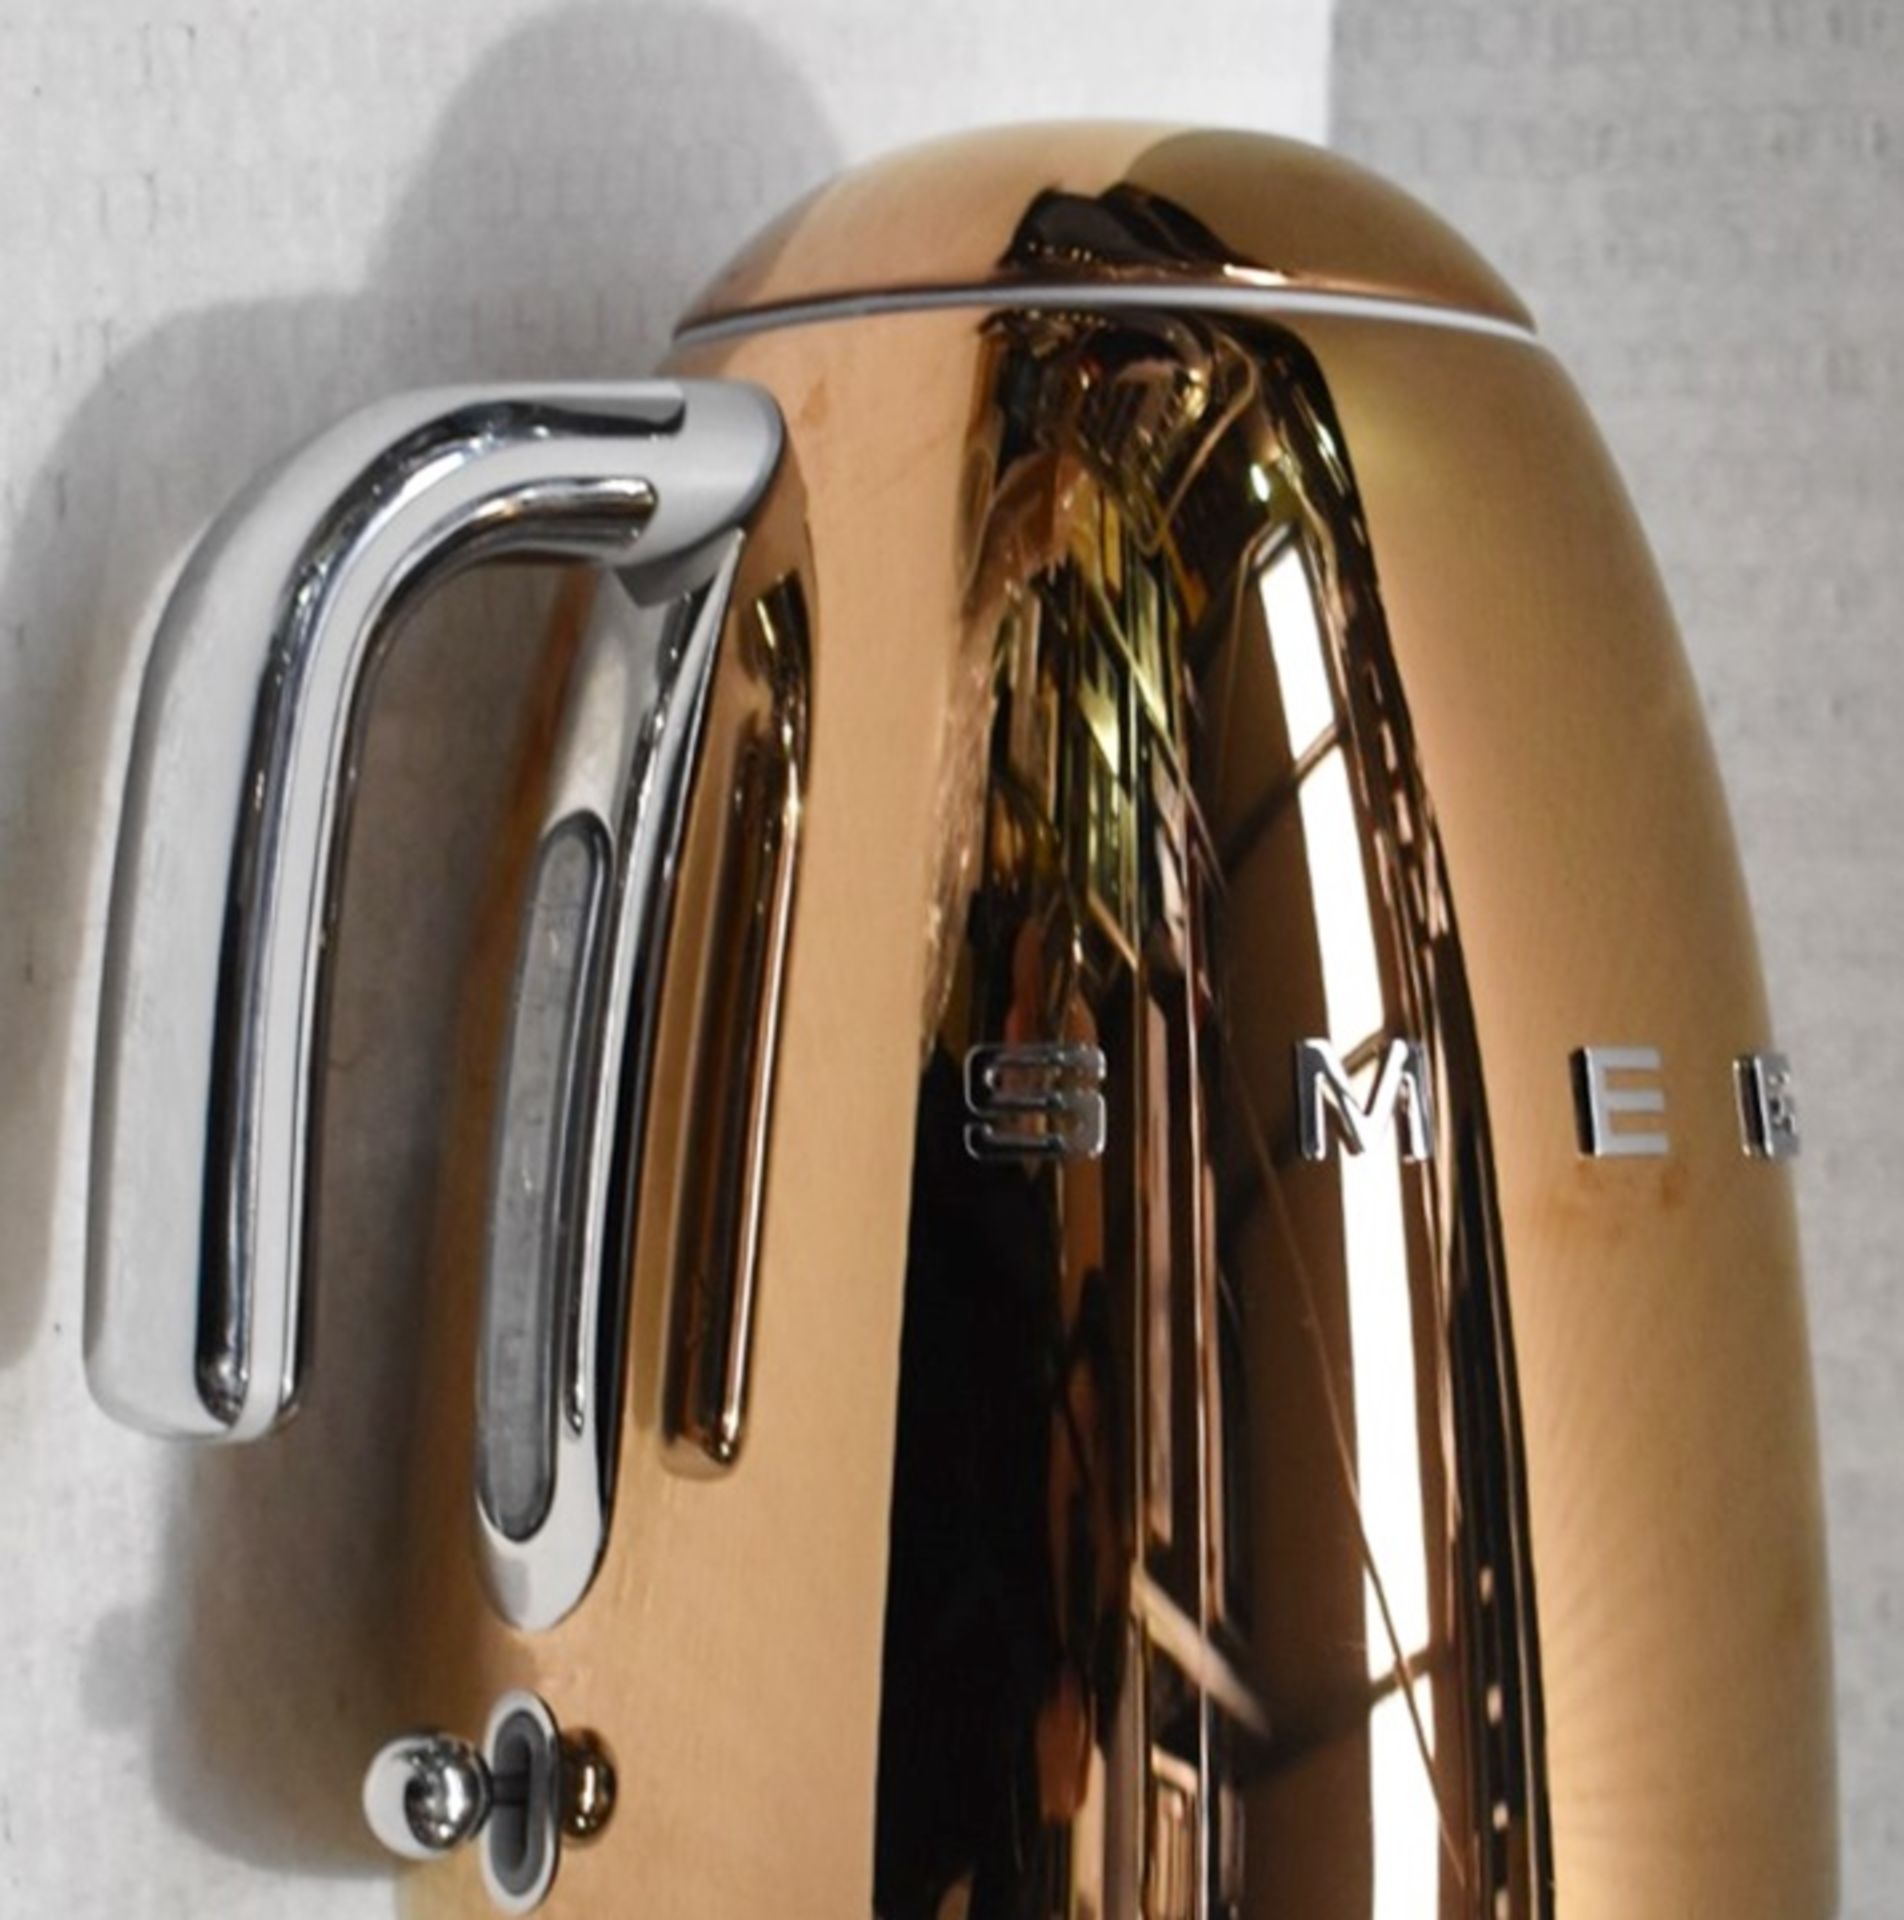 1 x SMEG 50’s Retro Style 1.7L Kettle with a Rose Gold Finish - Original Price £189.00 - Image 5 of 11